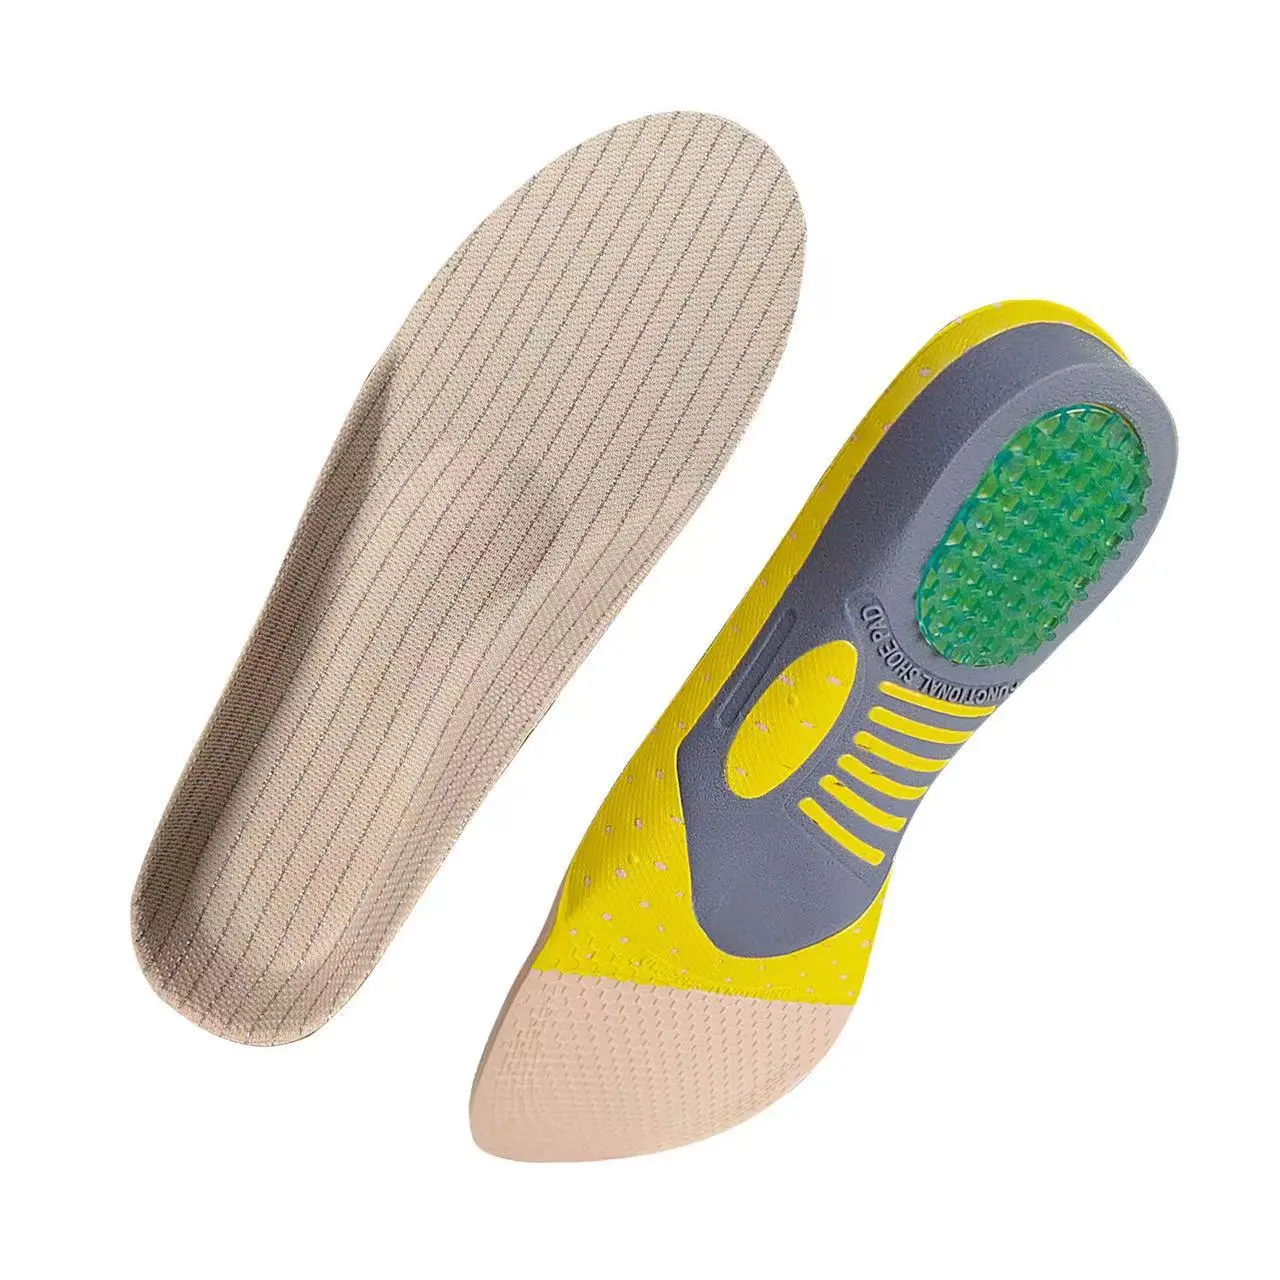 Wholesale Arch Support Multi Layered Design Latex Vktry Performance Memory Foam Material Carbon Fiber Insoles for Flat Foot